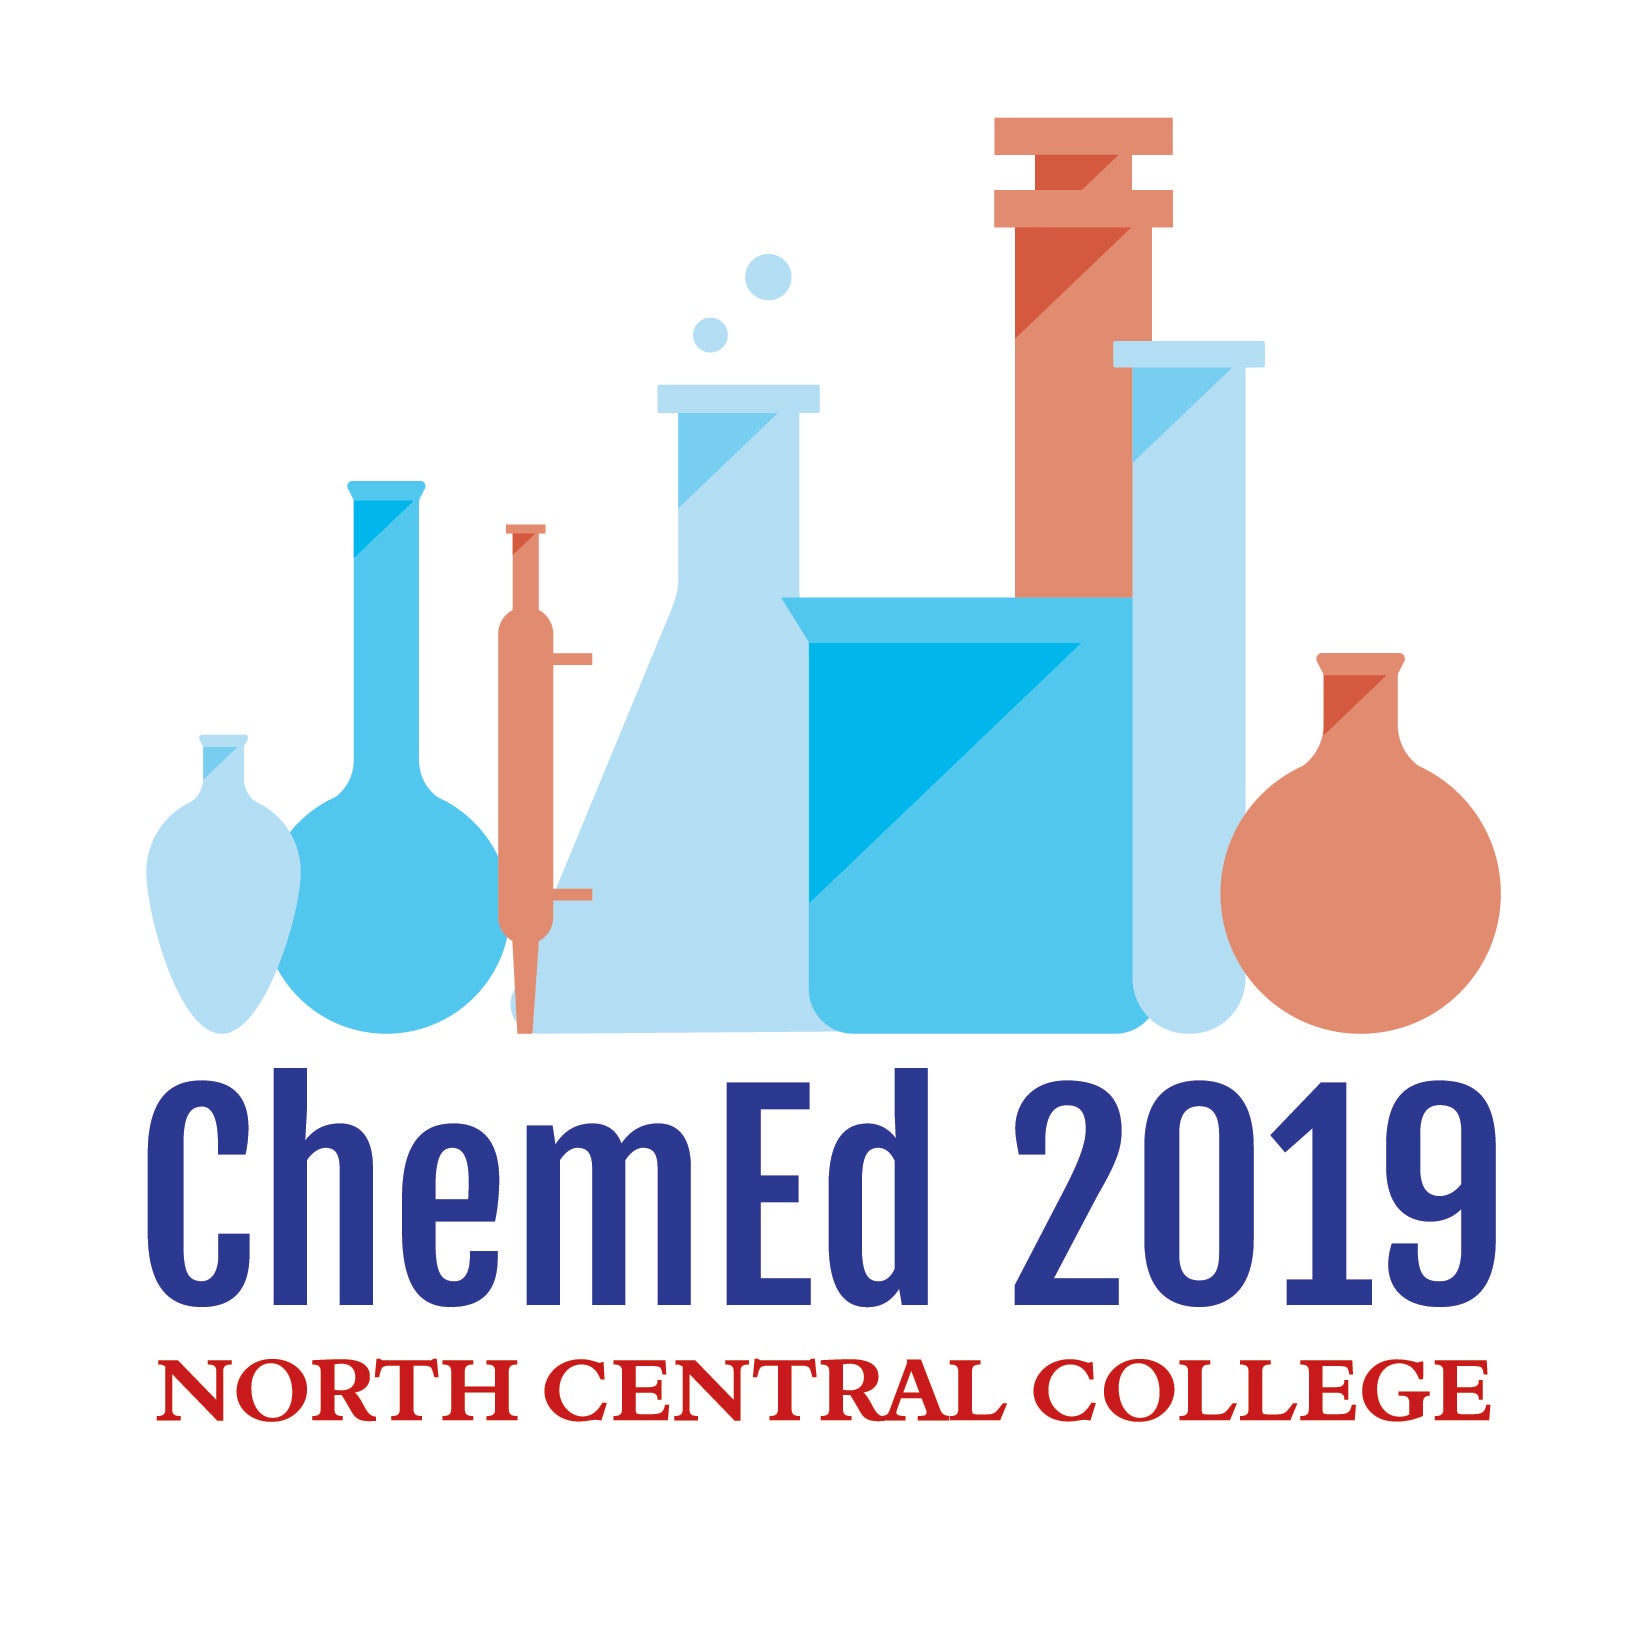 logo of ChemEd 2019 with illustrations of blue and red glassware